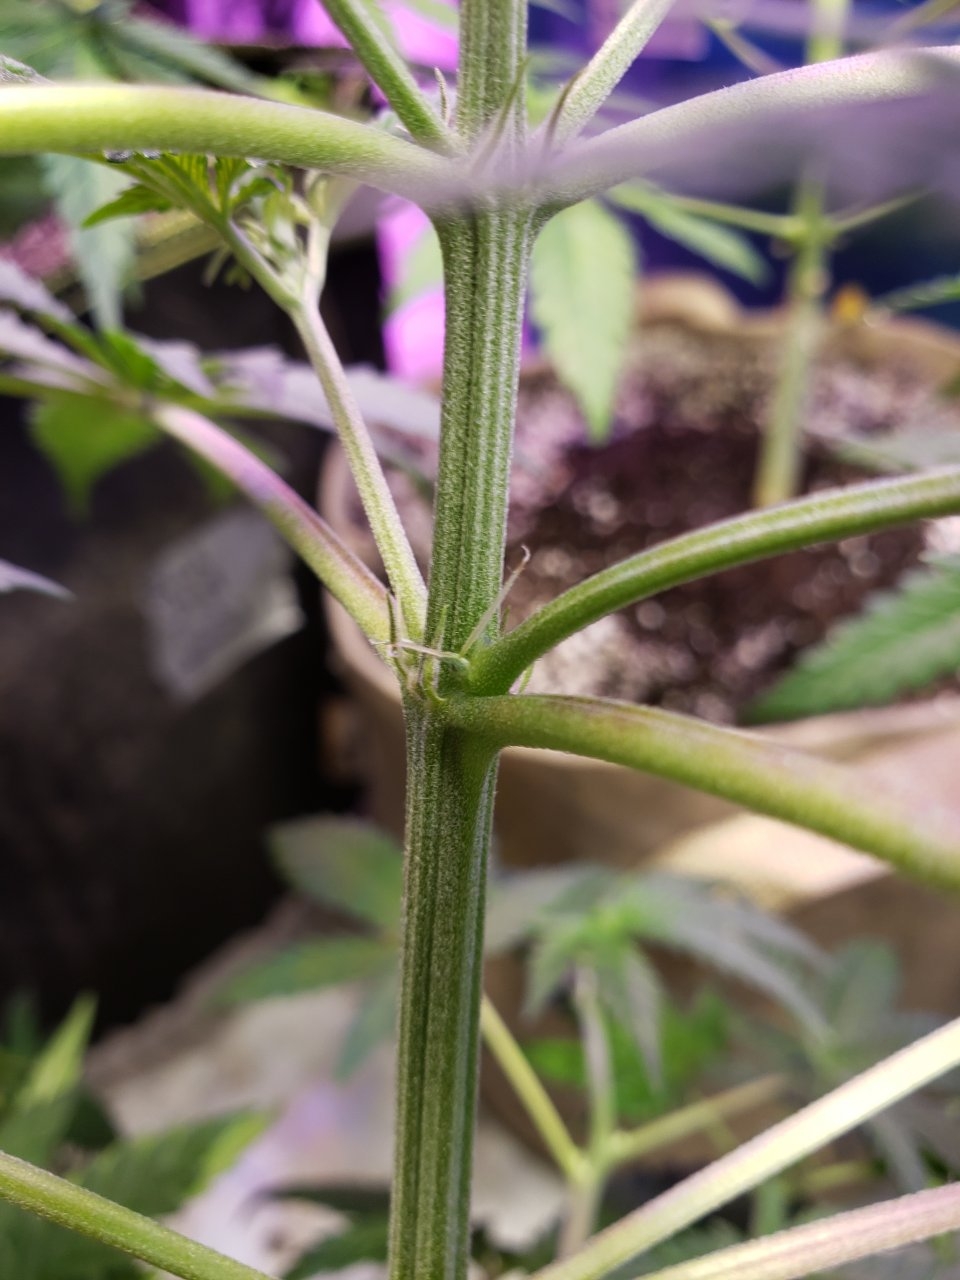 Pineapple Chunk #1 is this a female